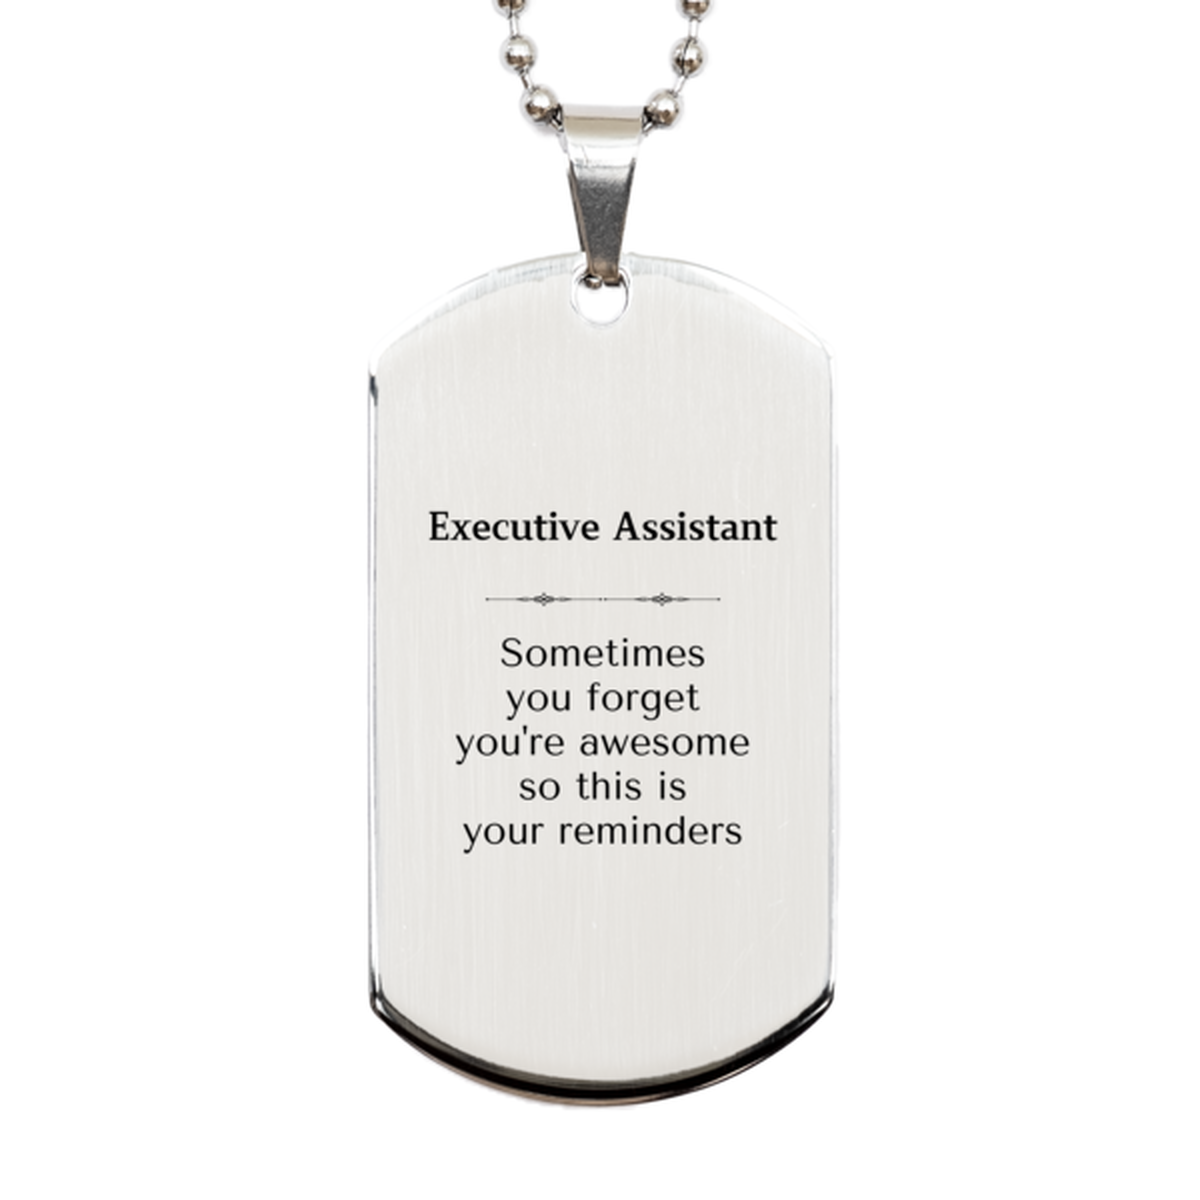 Sentimental Executive Assistant Silver Dog Tag, Executive Assistant Sometimes you forget you're awesome so this is your reminders, Graduation Christmas Birthday Gifts for Executive Assistant, Men, Women, Coworkers